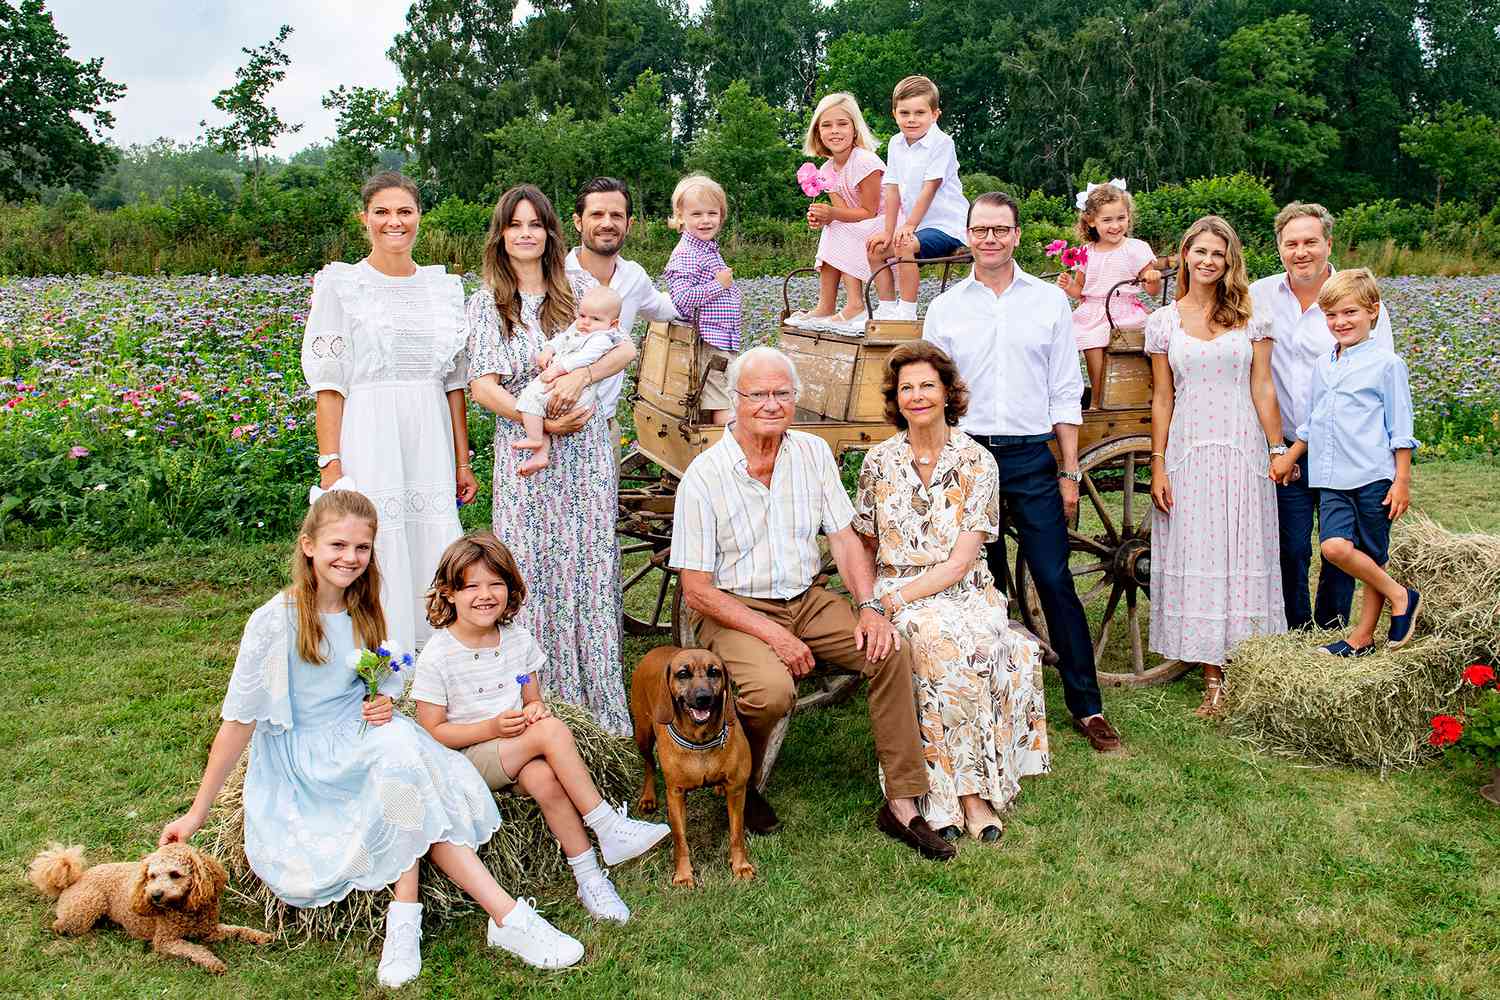 Swedish Royal Family Gathers for Summer Family Portrait | PEOPLE.com